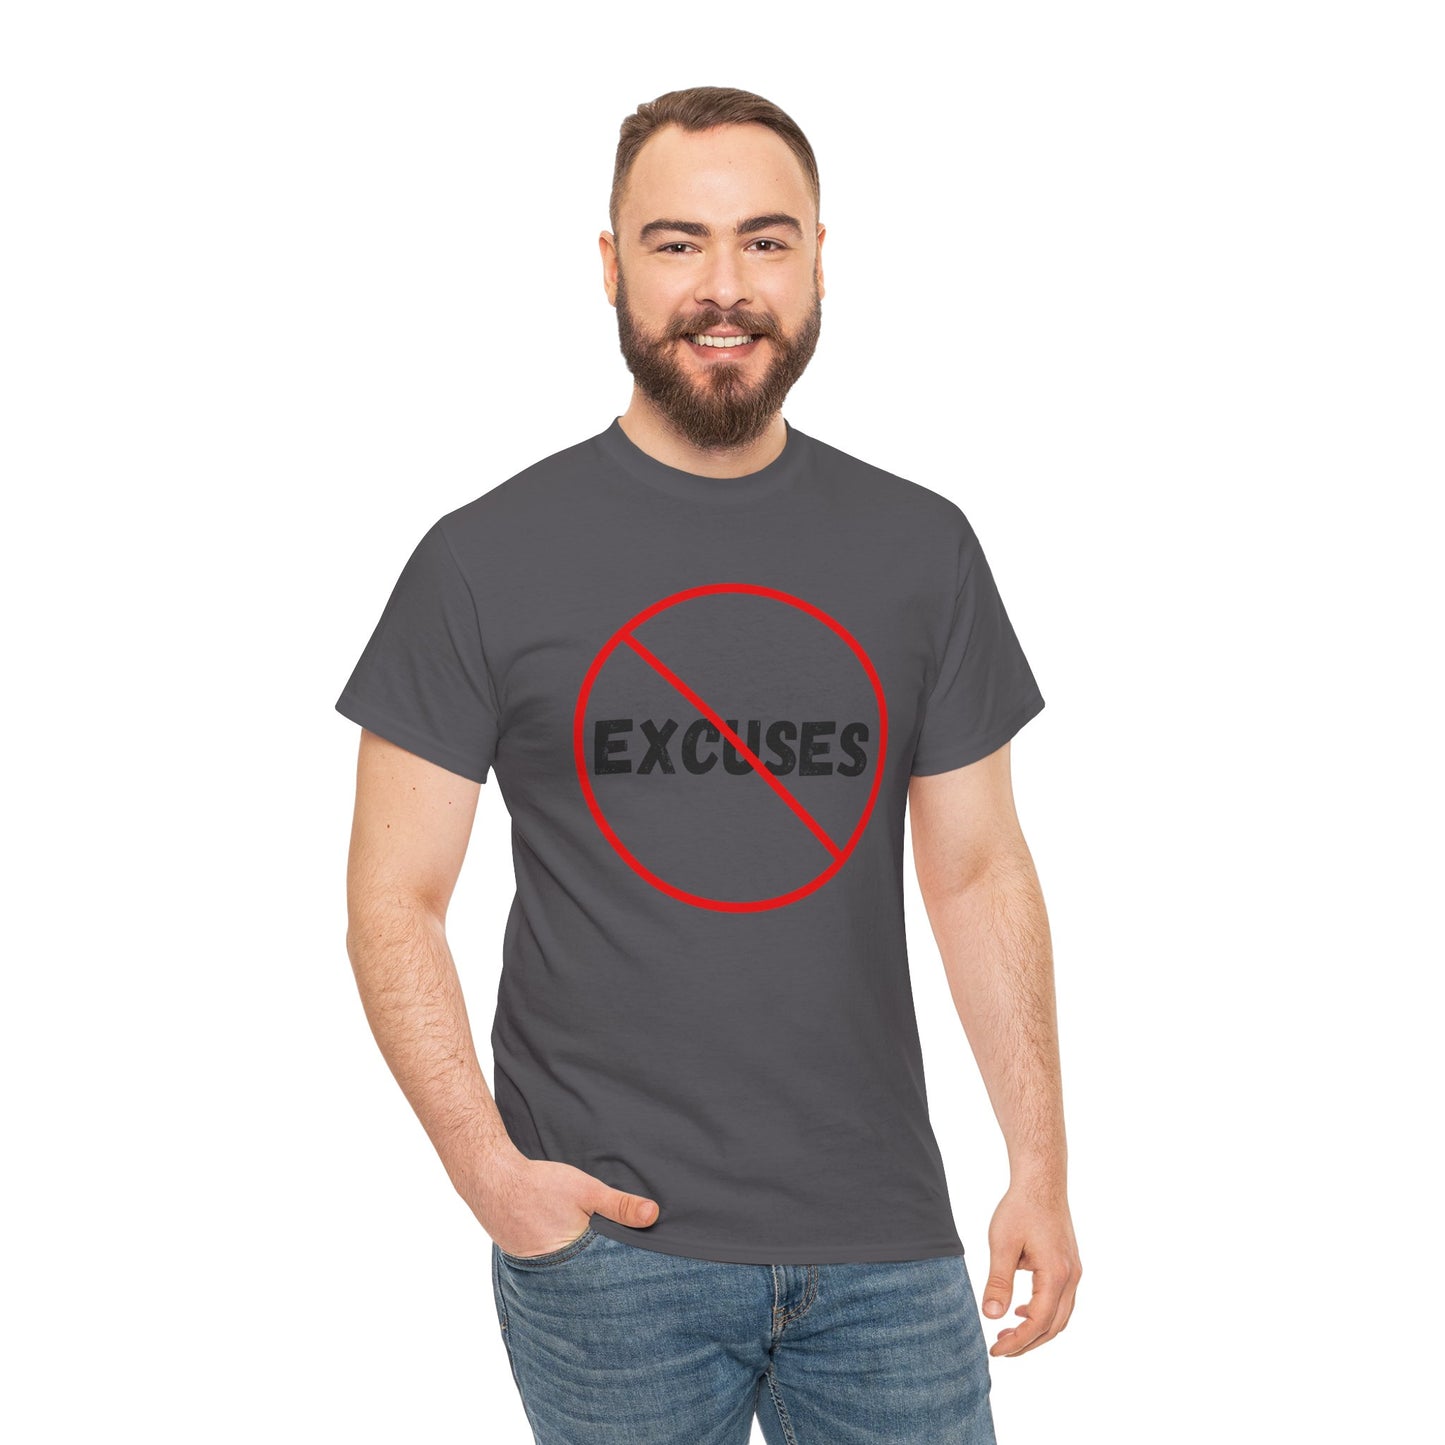 No Excuses T-Shirt, Gamer Tee 100% Cotton, 6 Colours, AUS - USA - CAN warehouse, free post.